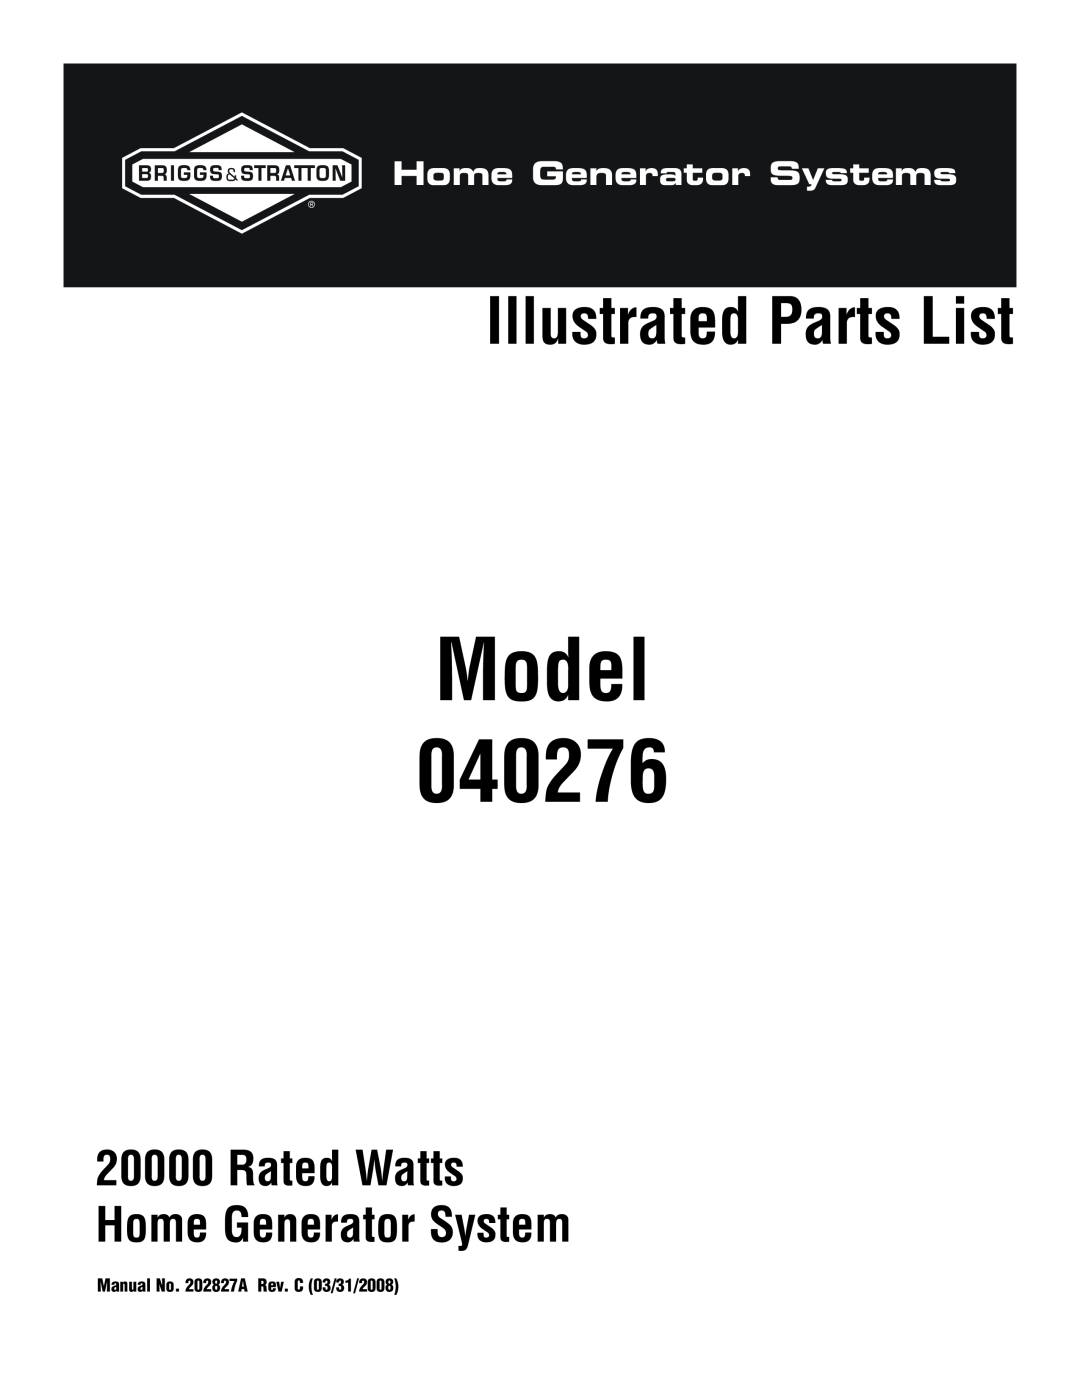 Briggs & Stratton 40276 manual Model, Illustrated Parts List, Rated Watts Home Generator System, Home Generator Systems 